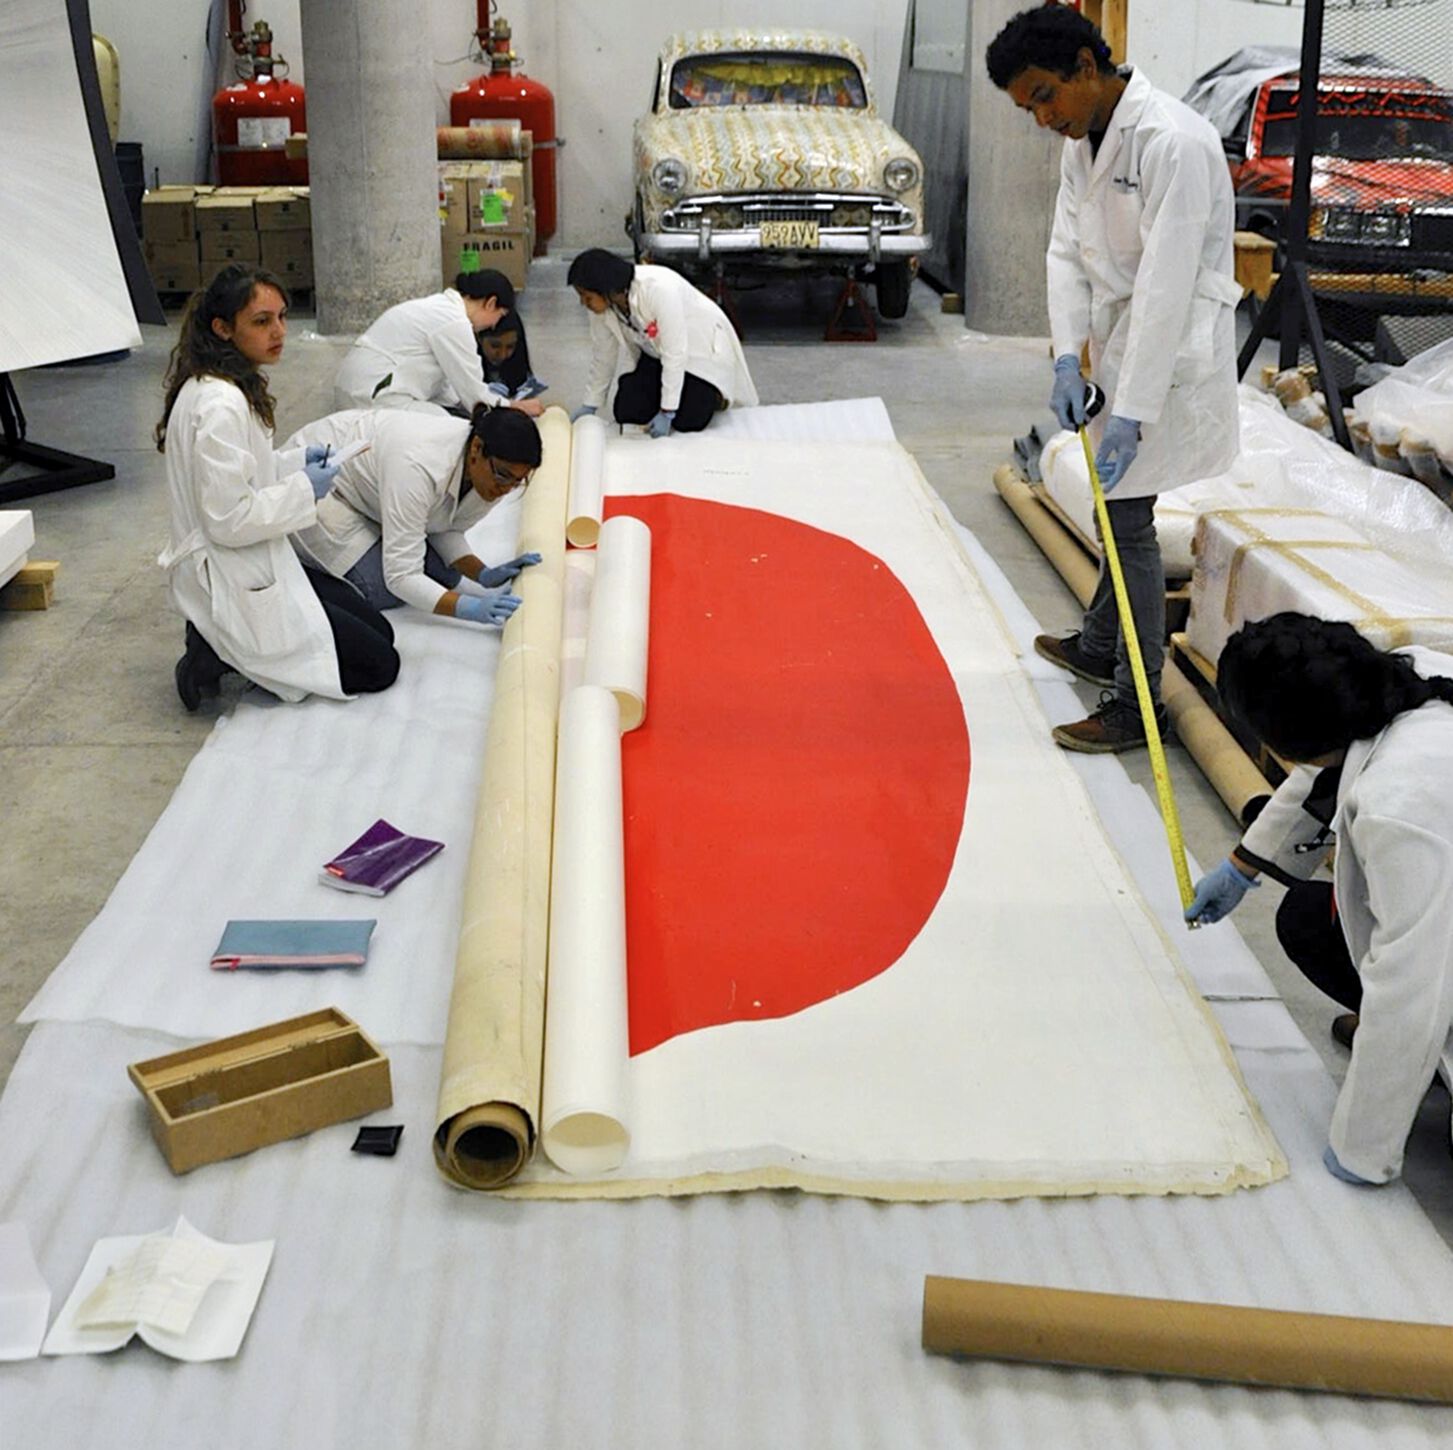 Students in lab coats measure, take notes on, and roll up, a poster adorned with a large red semicircle